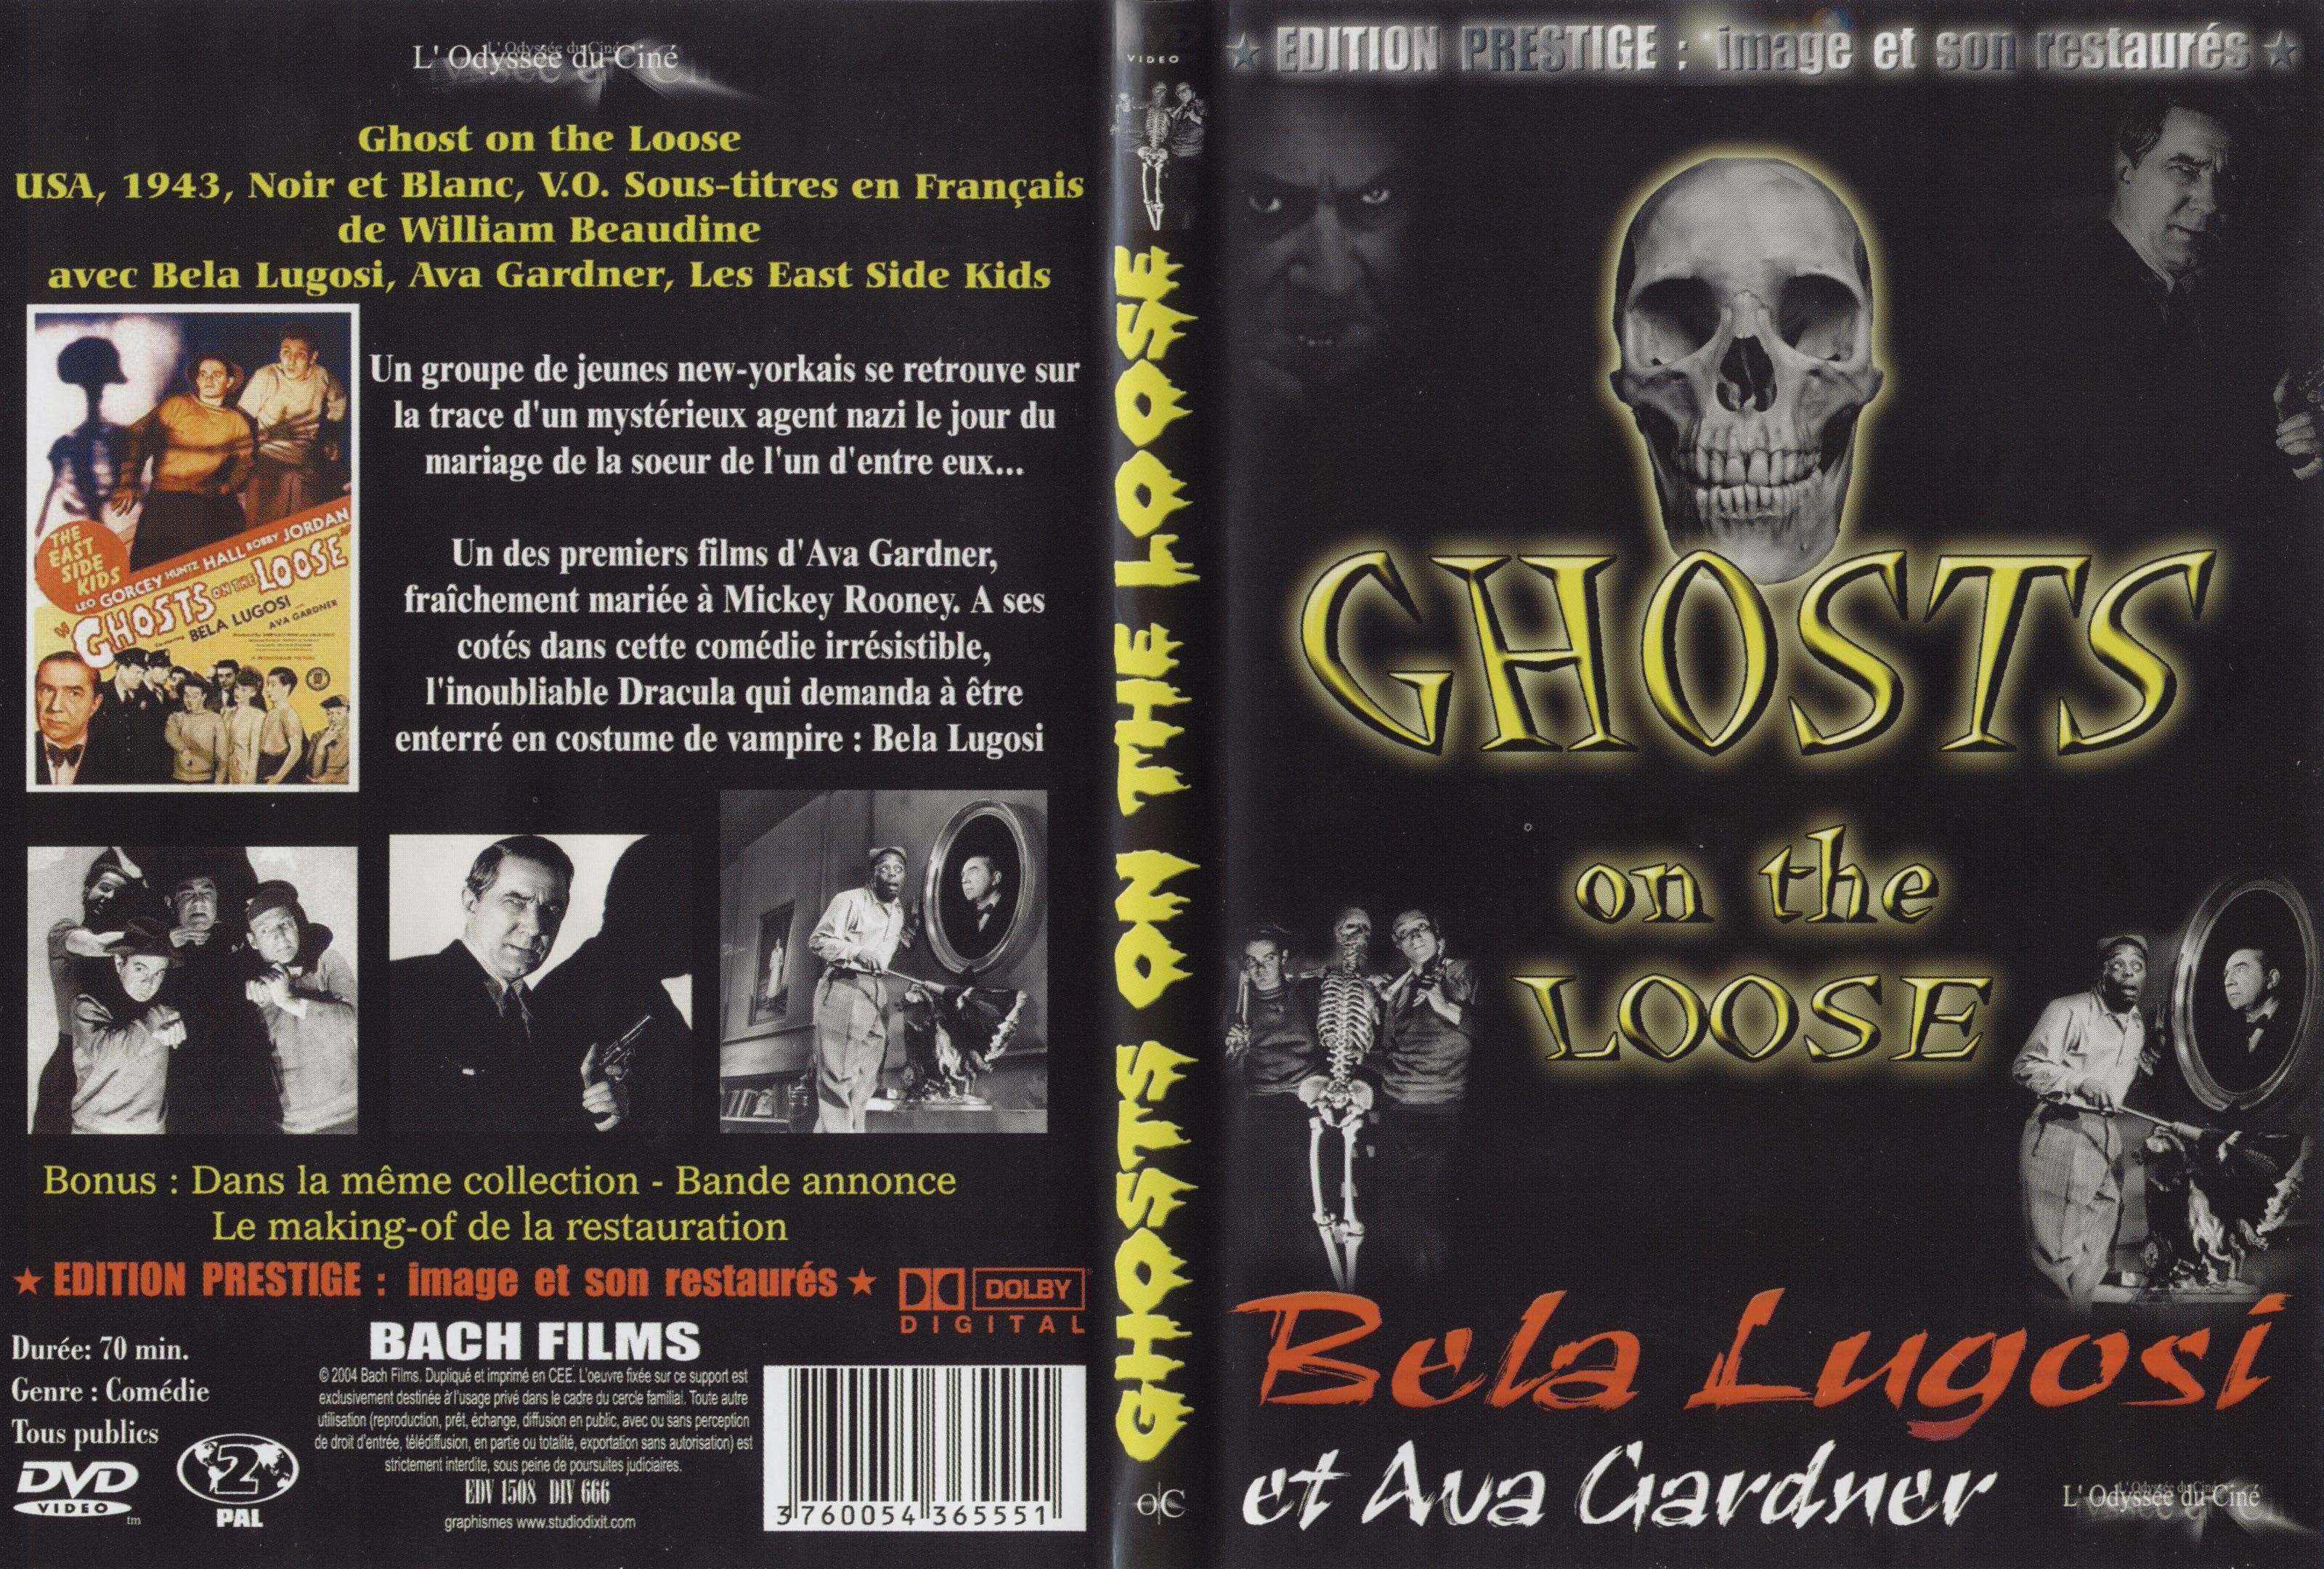 Jaquette DVD Ghosts on the loose